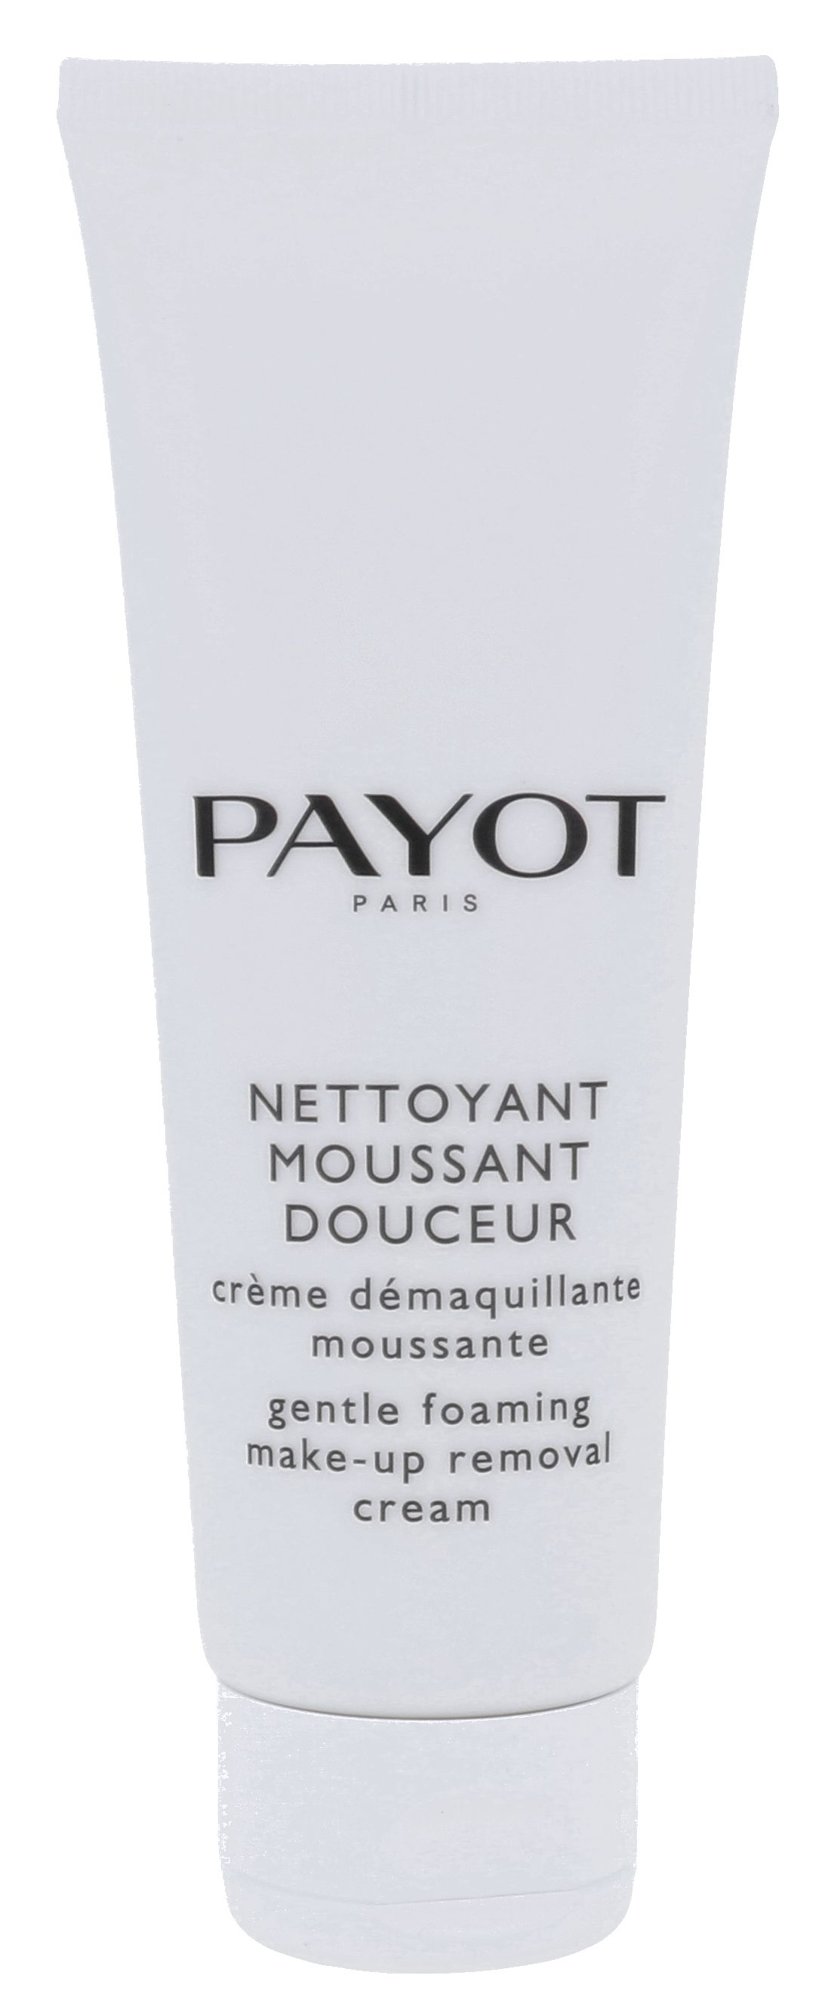 Payot Gentle Foaming Make-Up Removal Cream